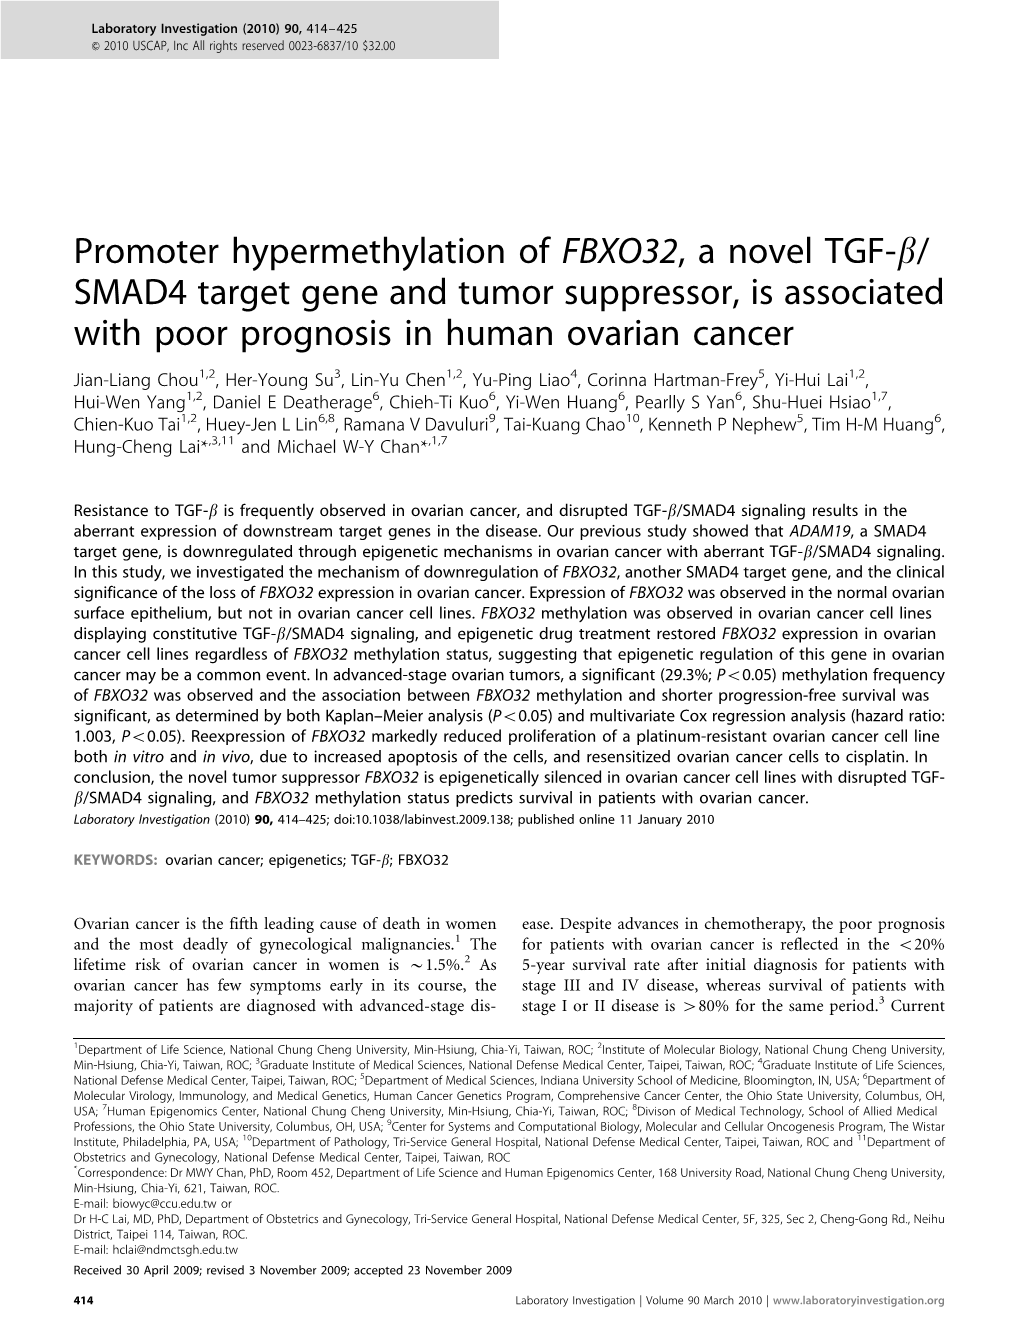 Promoter Hypermethylation of FBXO32, a Novel TGF-&Beta;&Sol;SMAD4 Target Gene and Tumor Suppressor, Is Associated with P